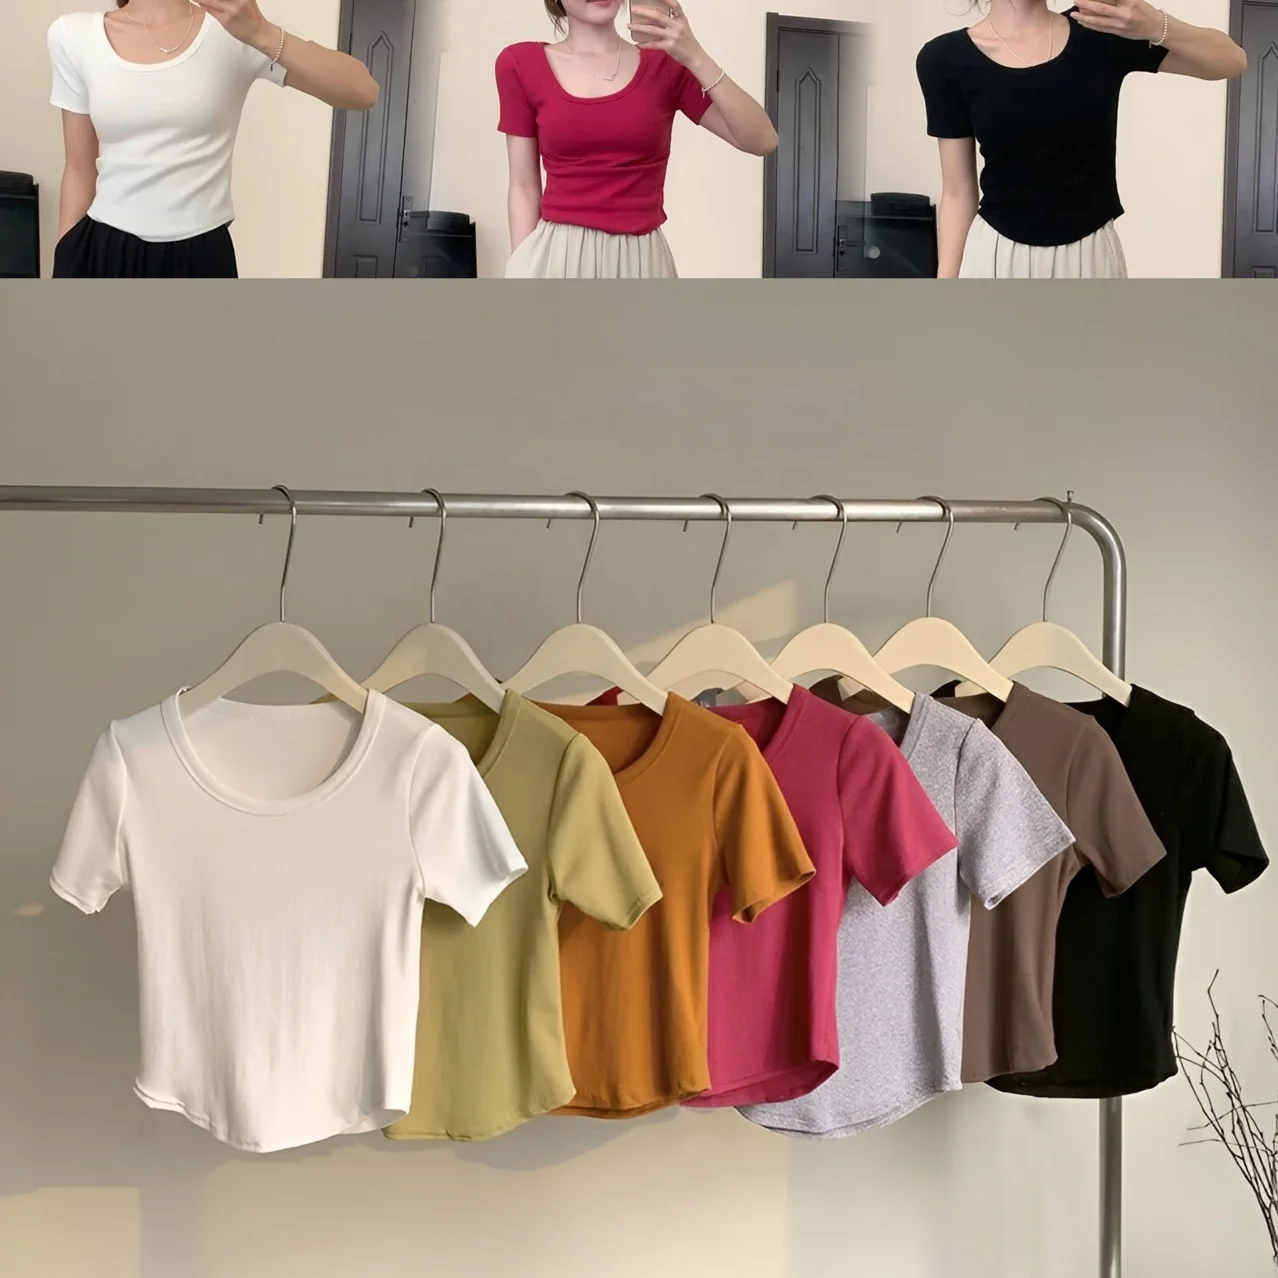 HERLOLLYCHIPS Long Sleeve Shirts for Women Mock Turtle Neck Short Sleeve Tops Sexy Casual Fitted Tee T-Shirts Tshirt